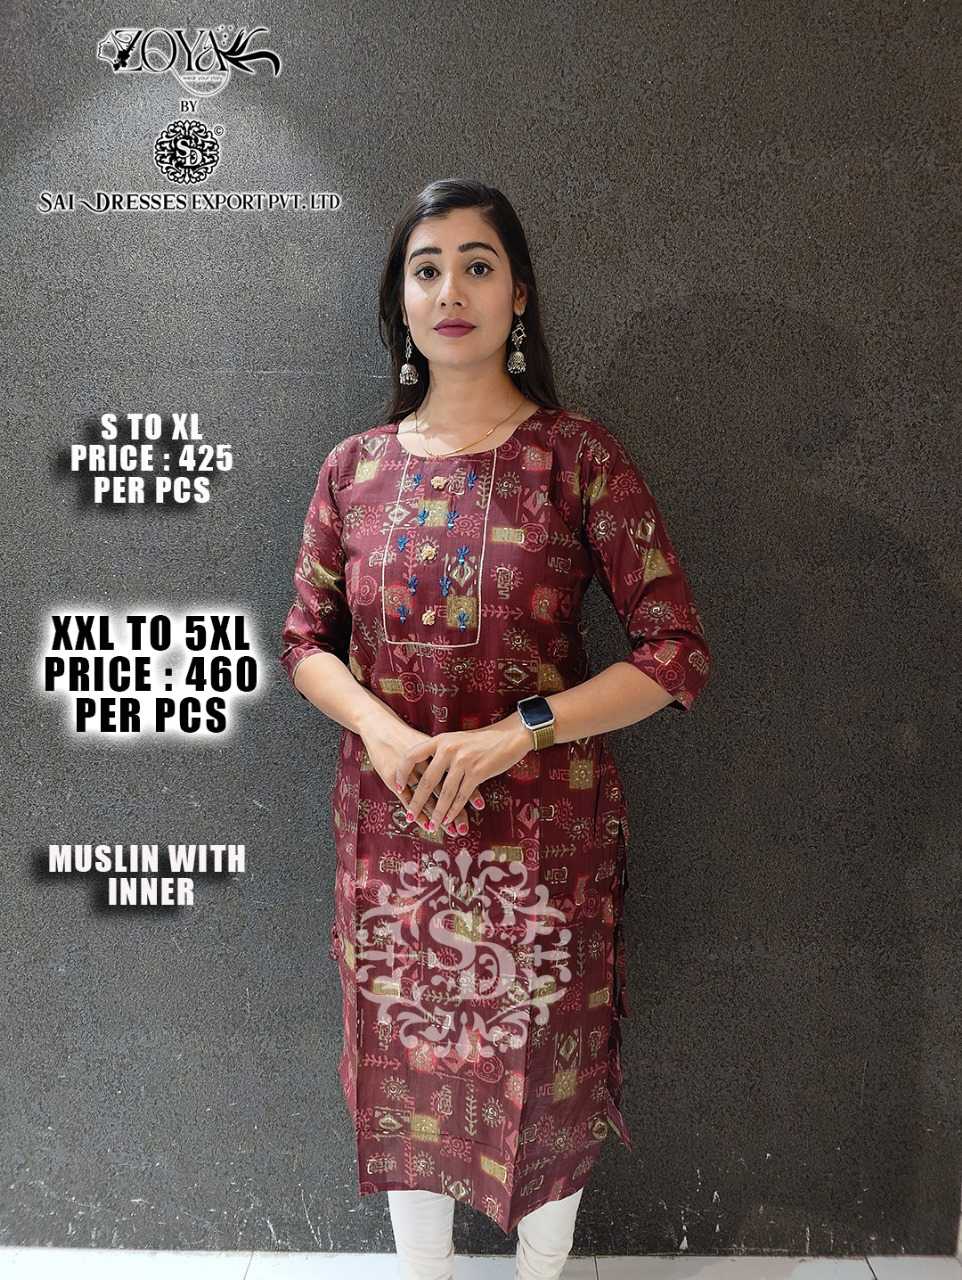 SAI DRESSES PRESENT D.NO SD79 READY TO WEAR BEAUTIFUL MUSLIN PRINTED STRAIGHT KURTI COMBO COLLECTION IN WHOLESALE RATE IN SURAT